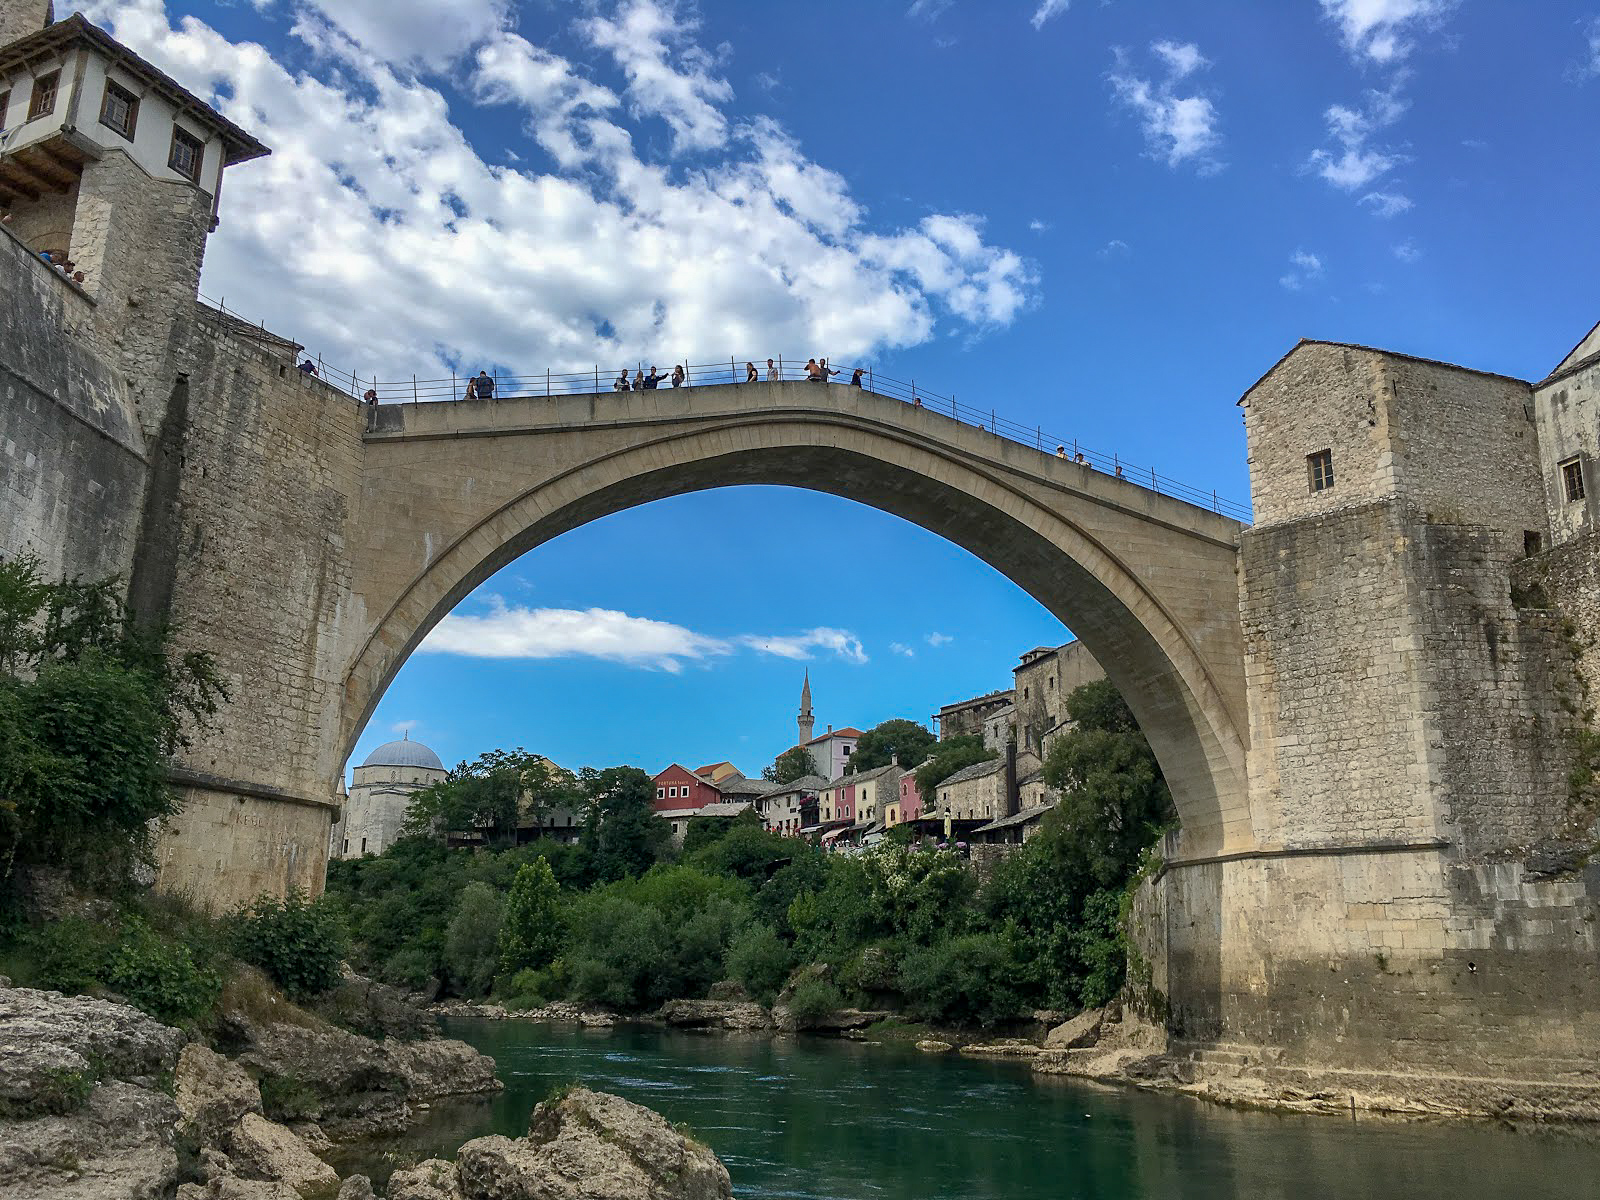 Looking up from the Neretva River at Stari Most, Mostar